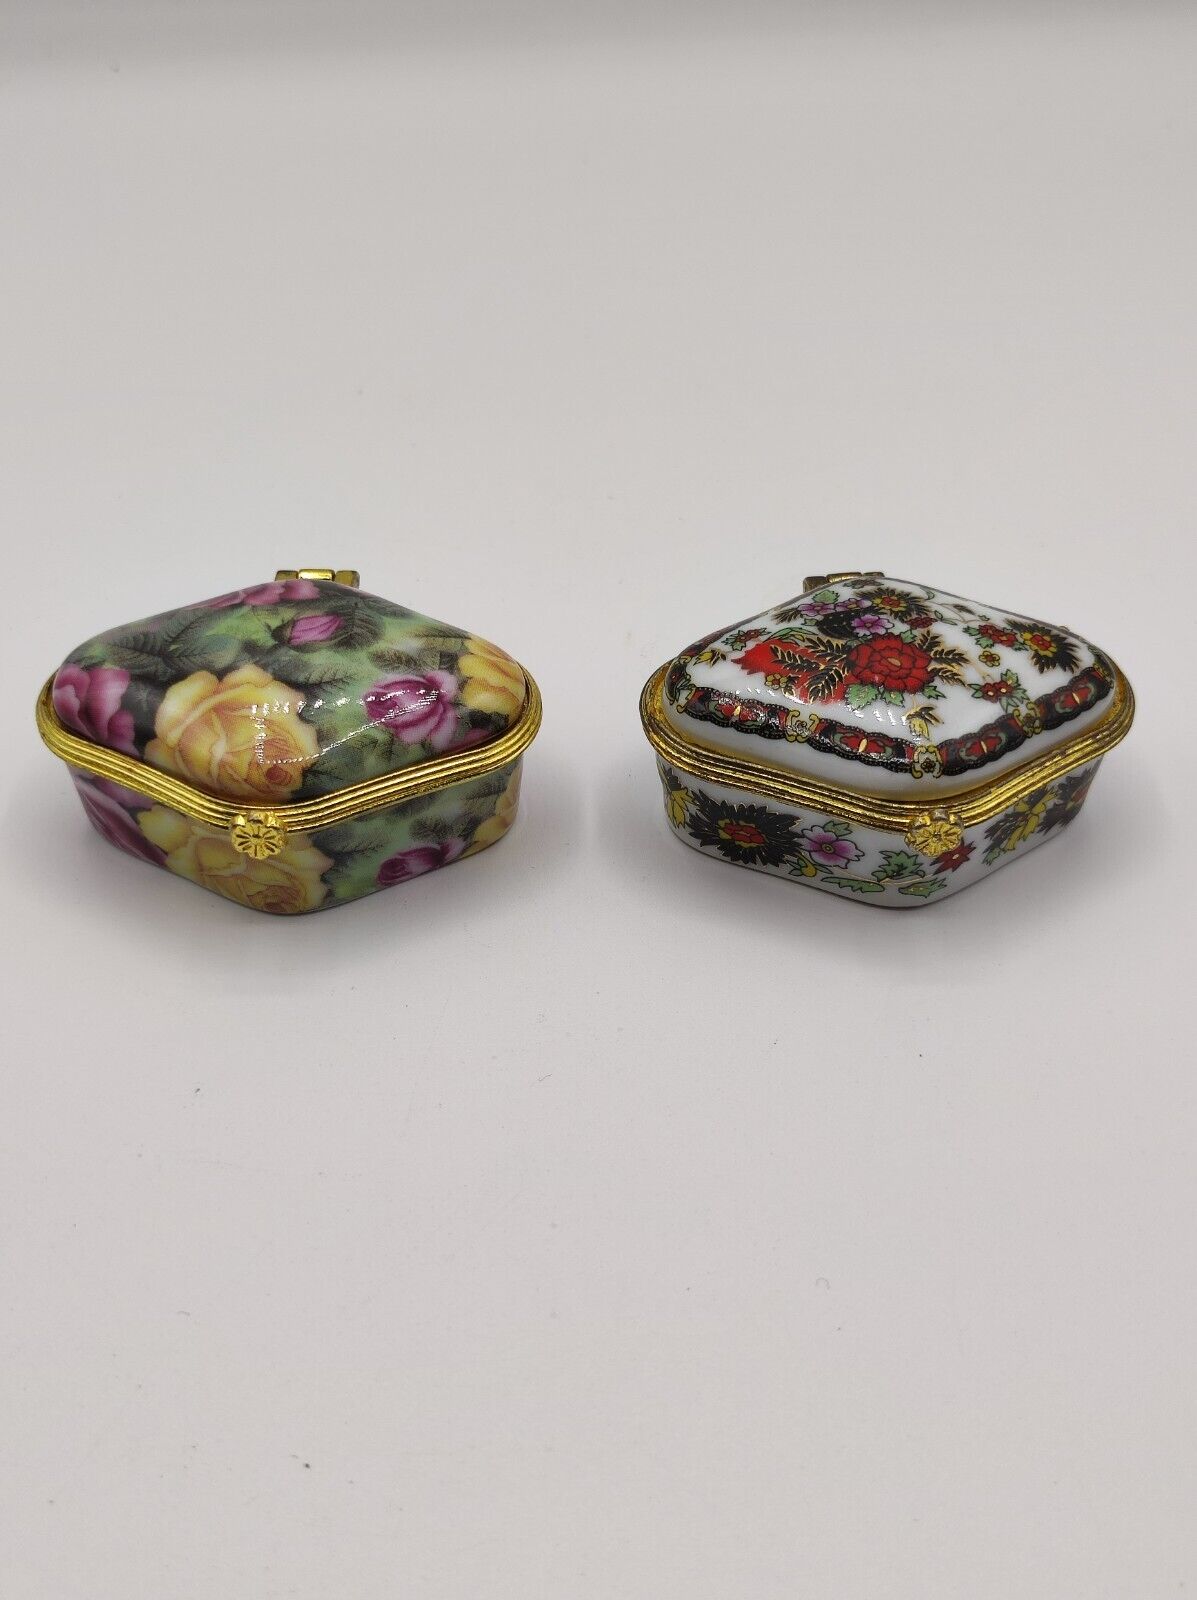 Vintage Antique French Small Round Oval Trinket Jewelry Pill Box - Set of 2